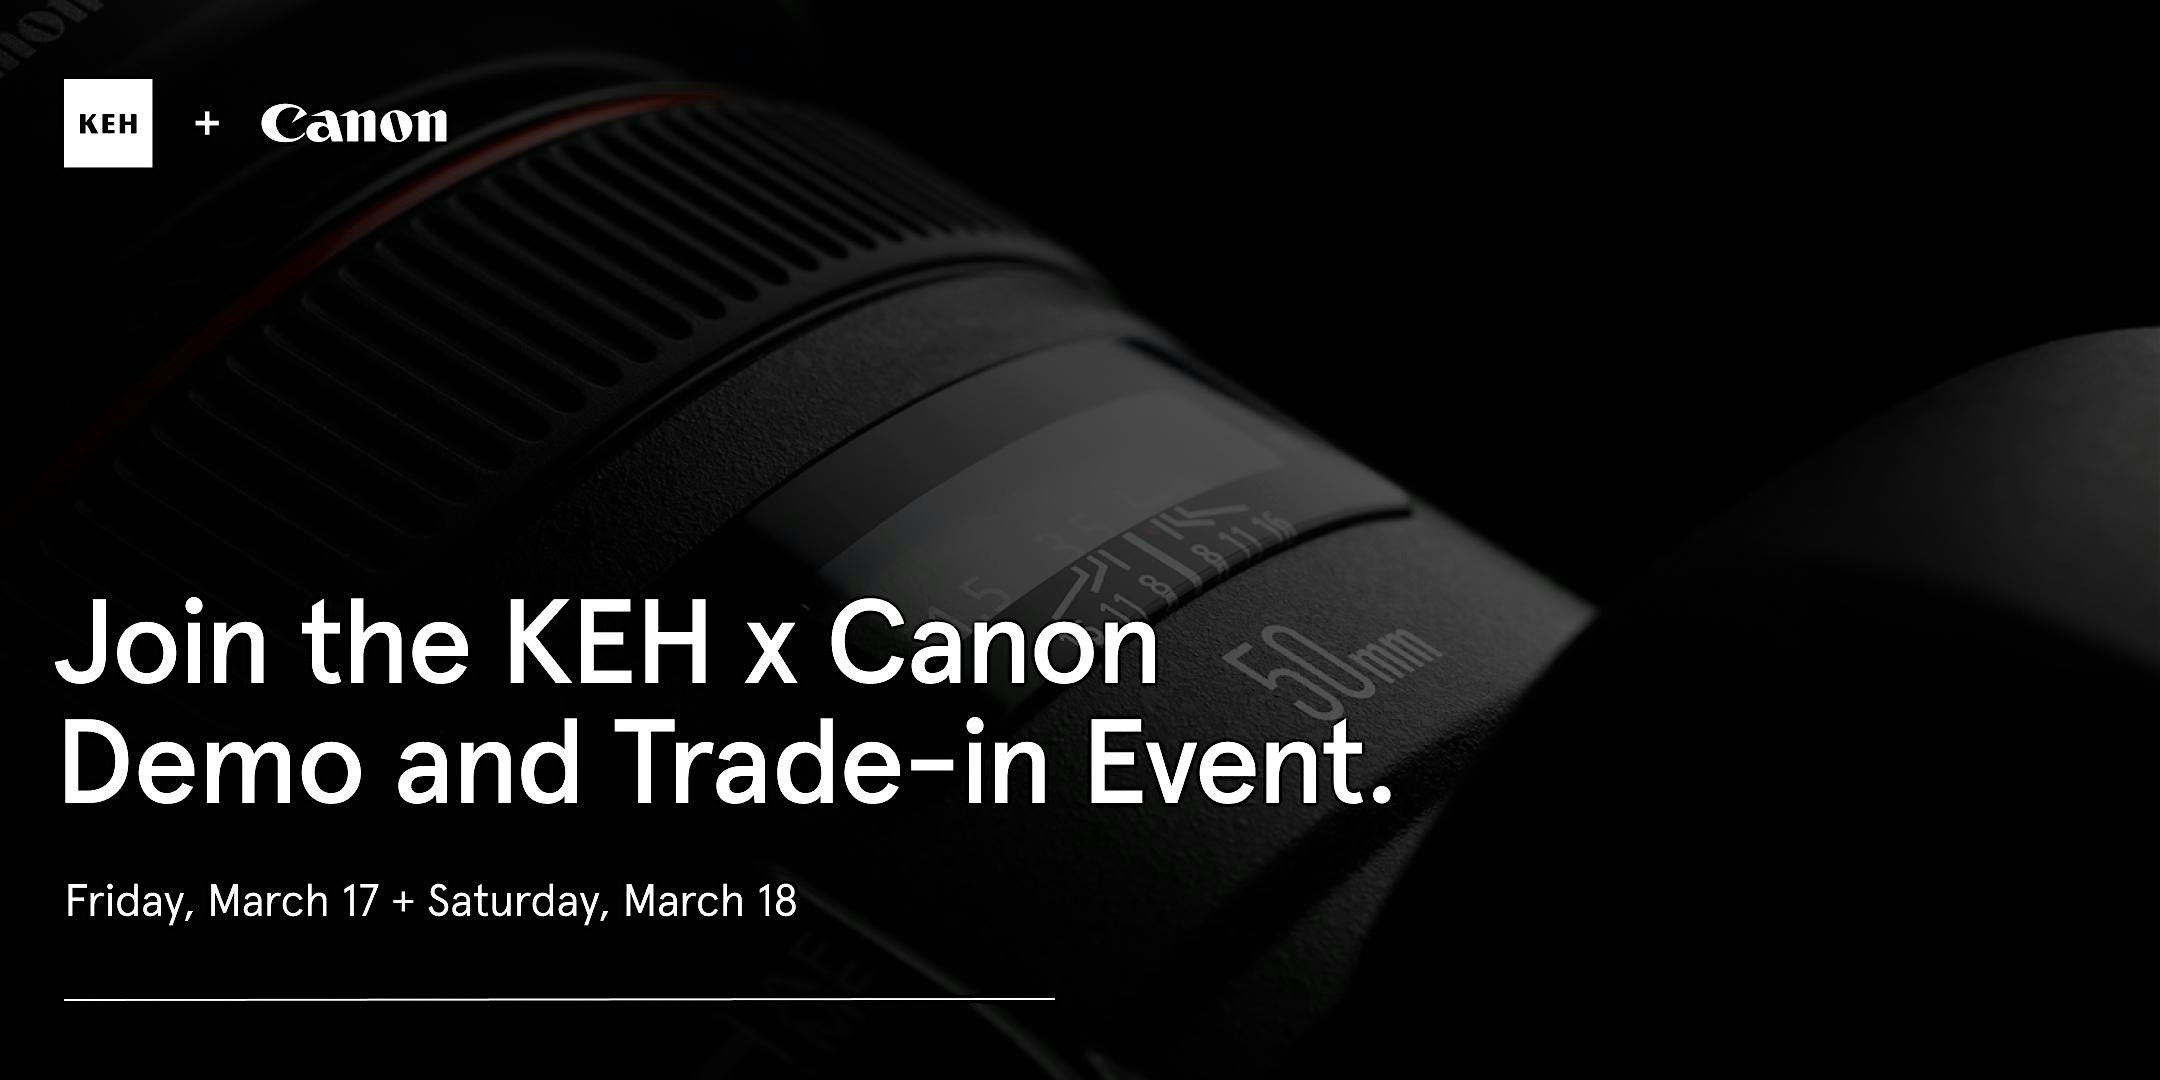 KEH + Canon Demo and Trade-in Event